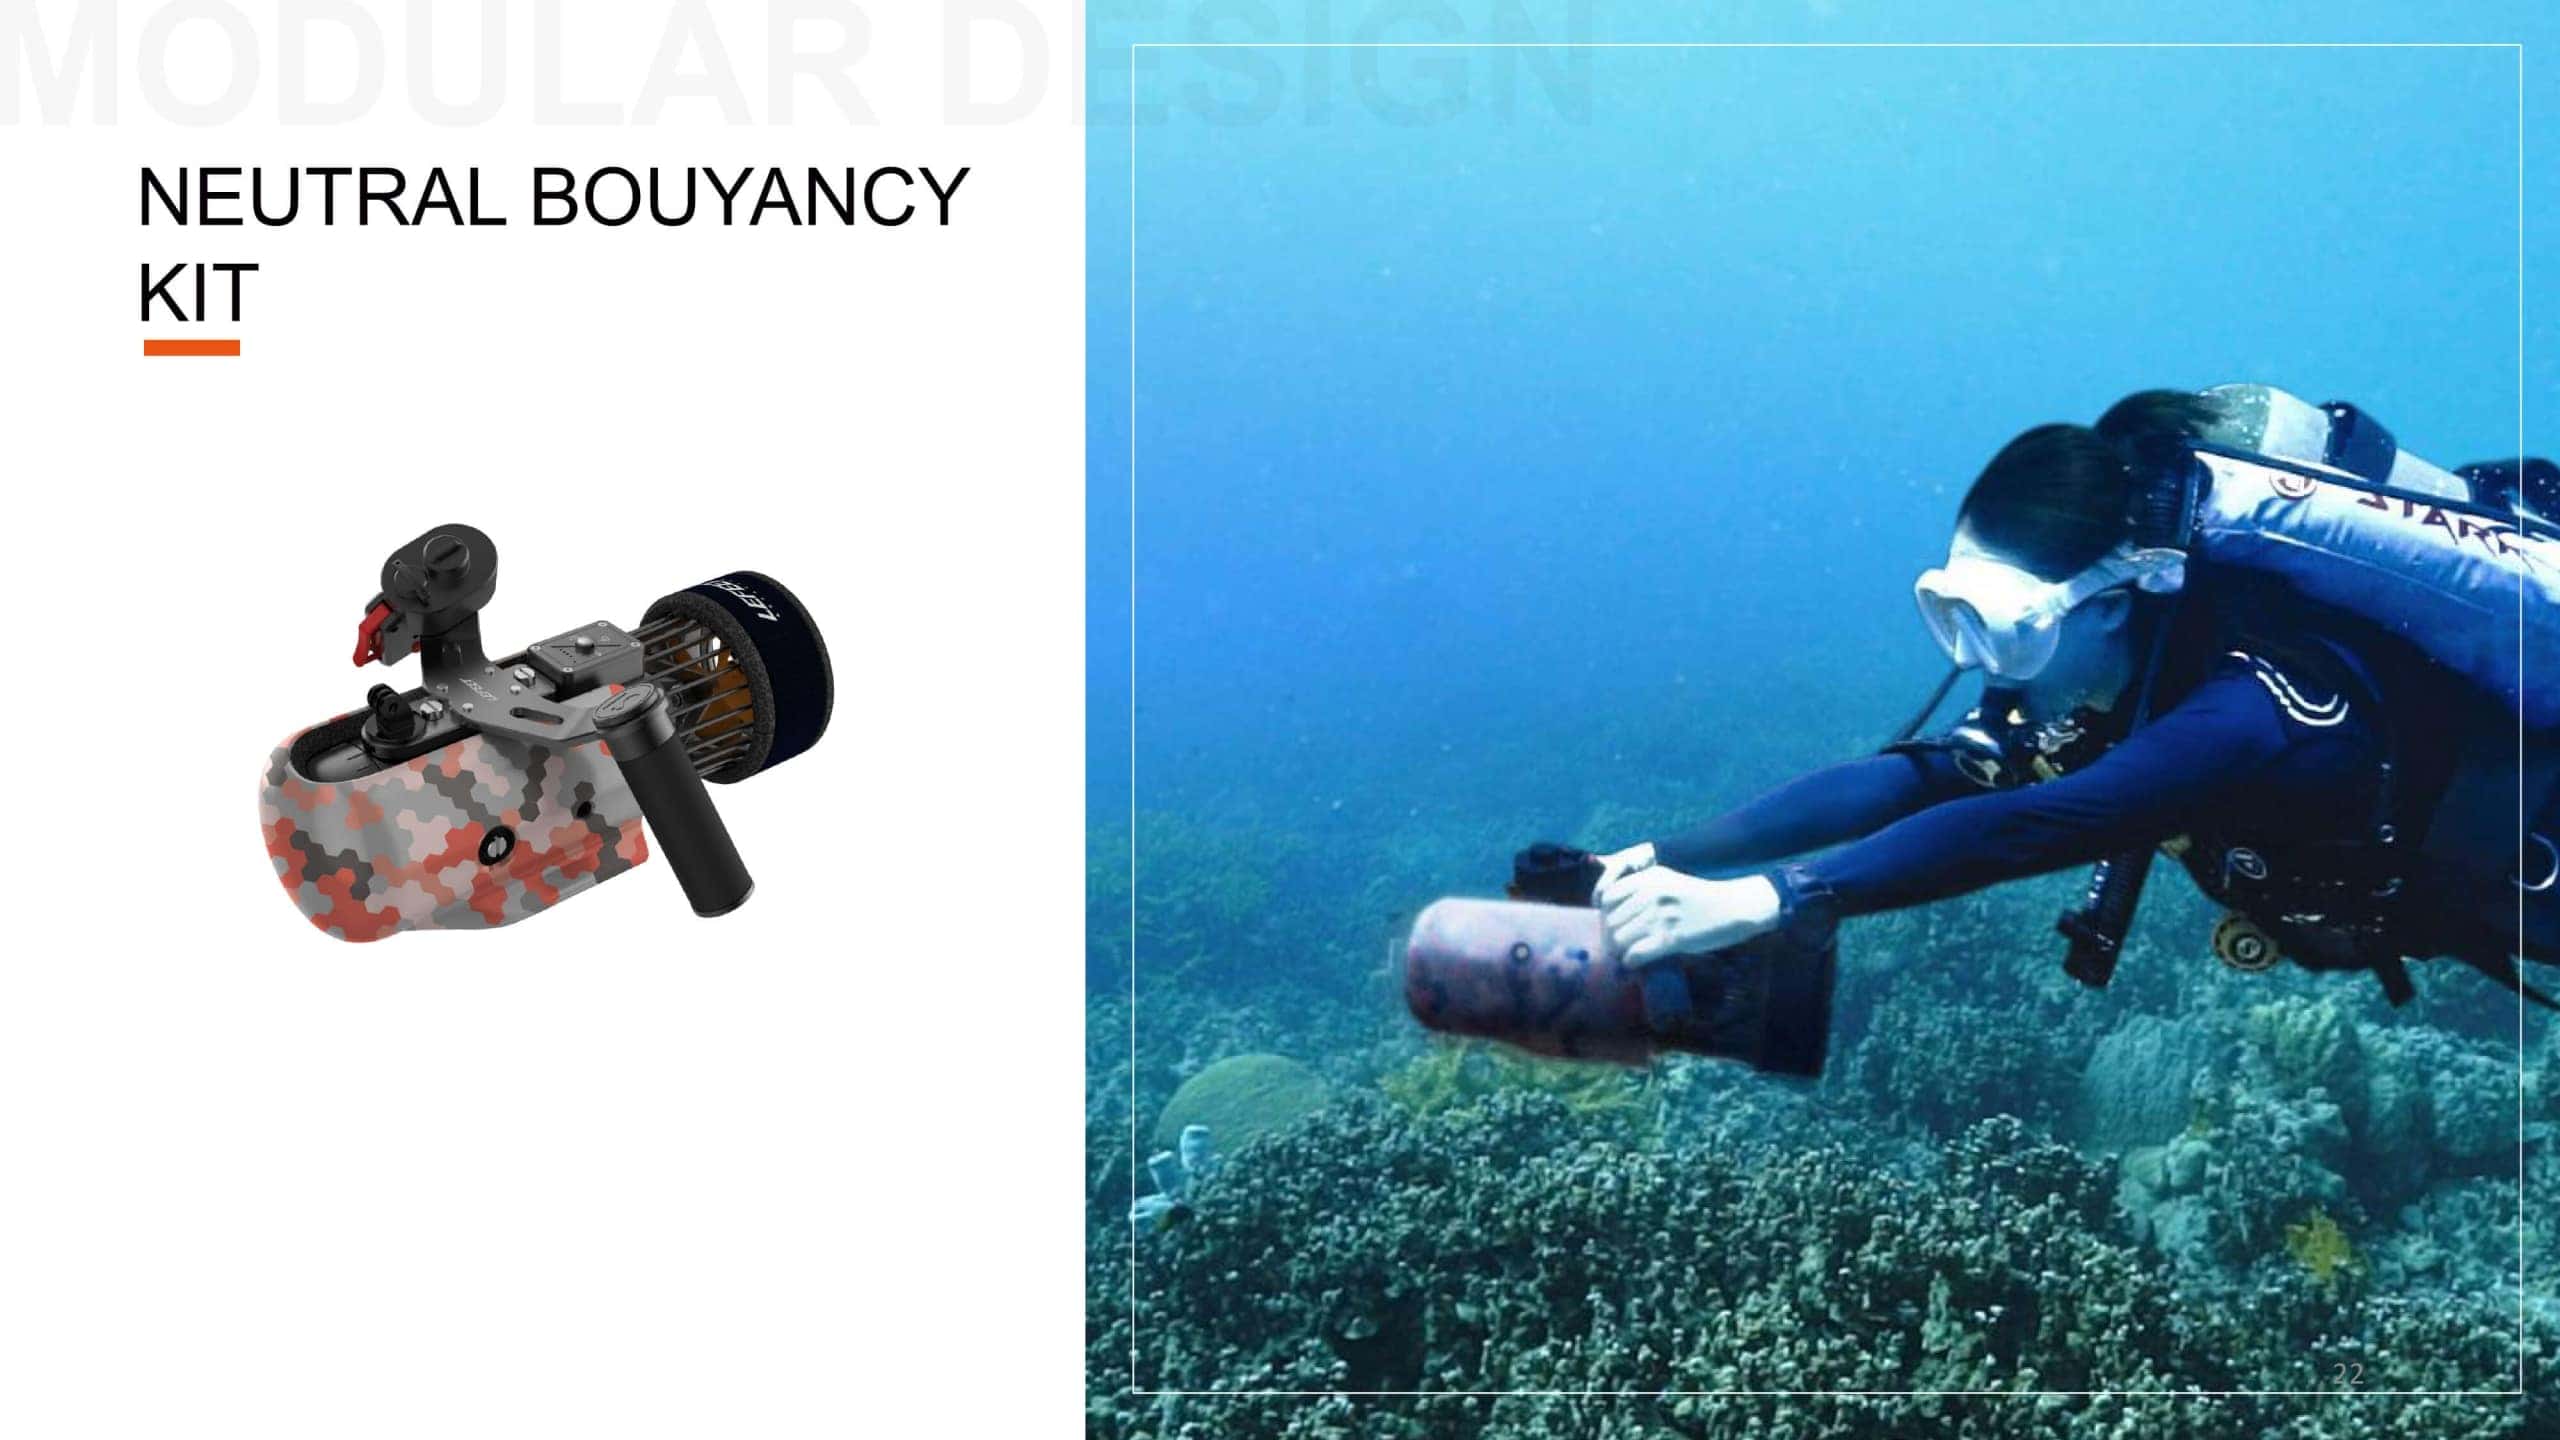 LEFEET S1 electric water scooter neutral buoyancy kit